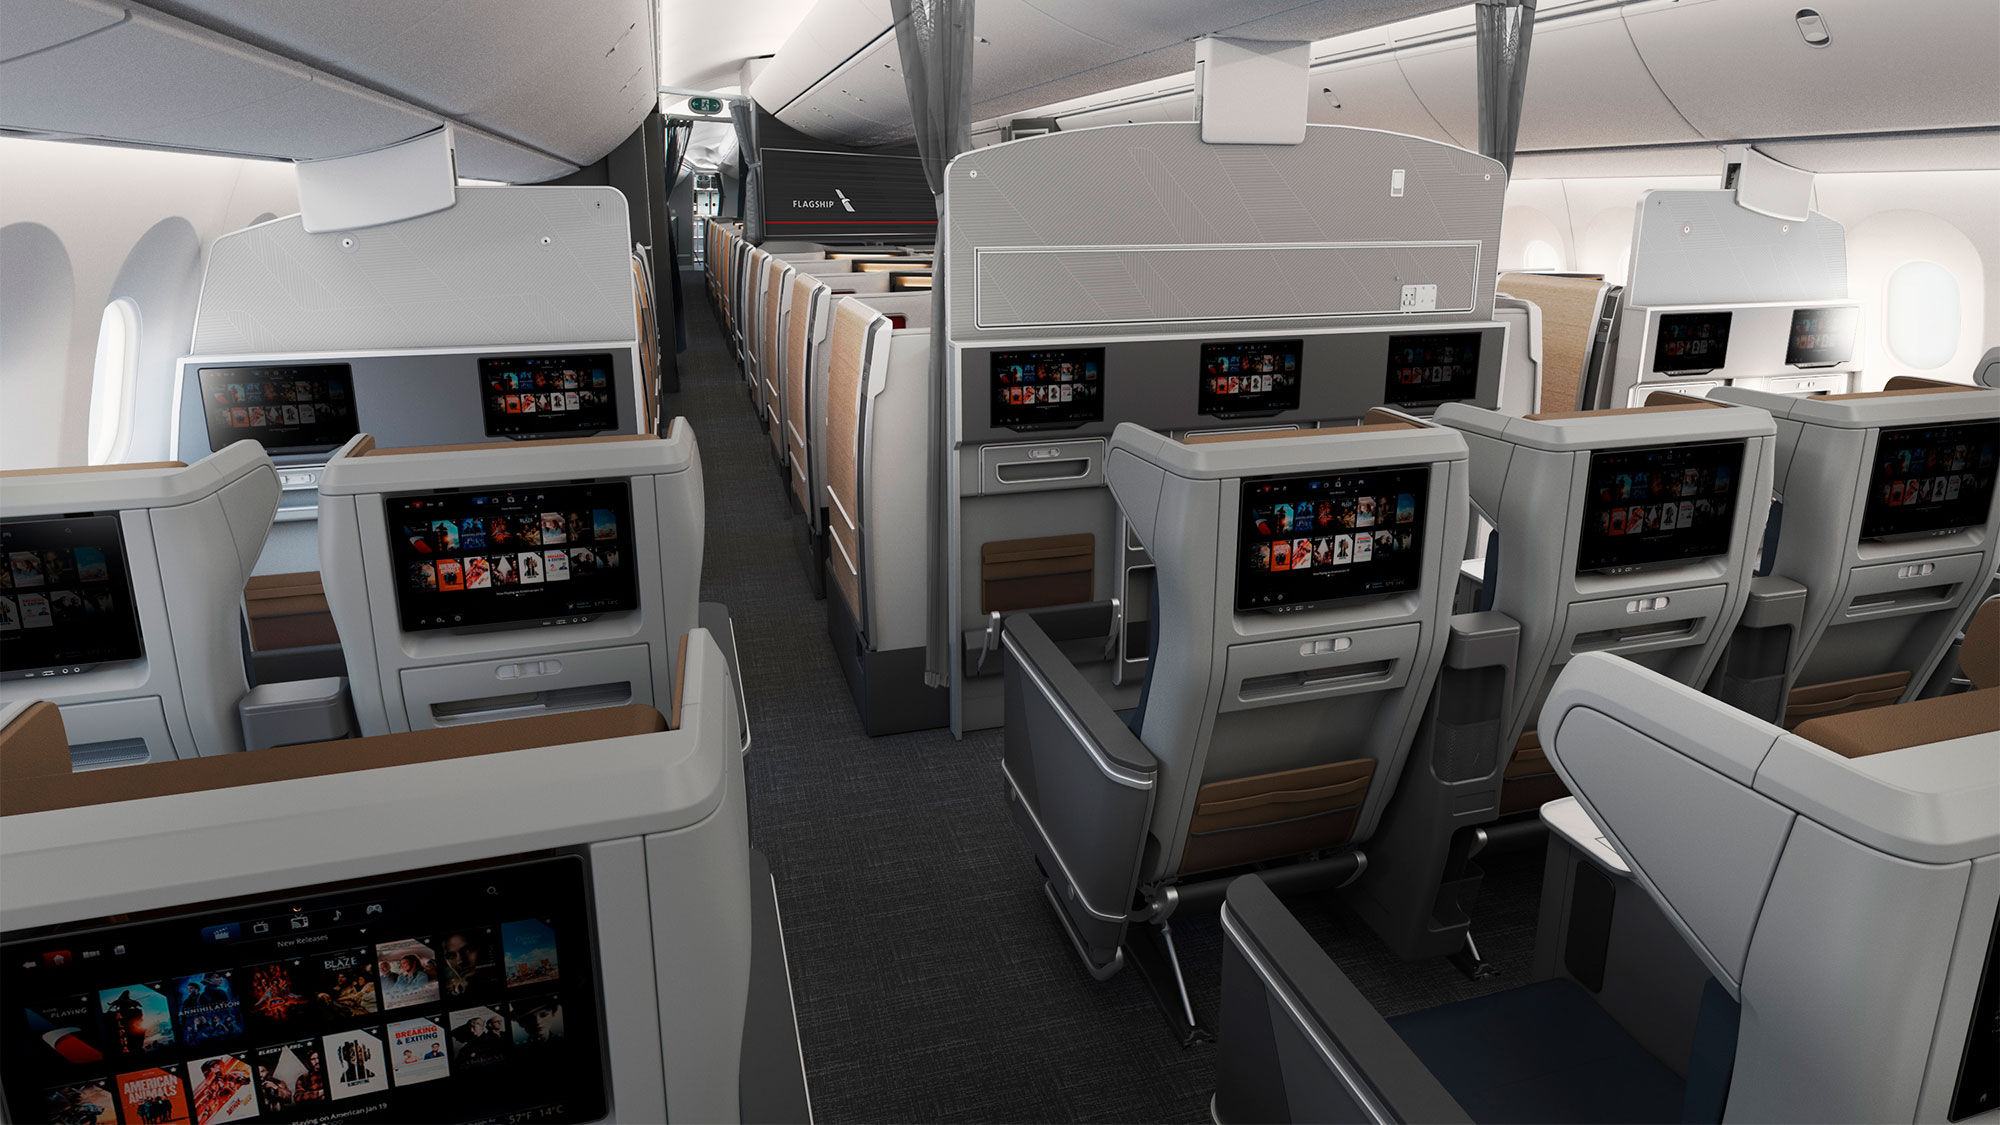 AA said its new premium economy seats will offer double the storage space of American's existing premium economy product.